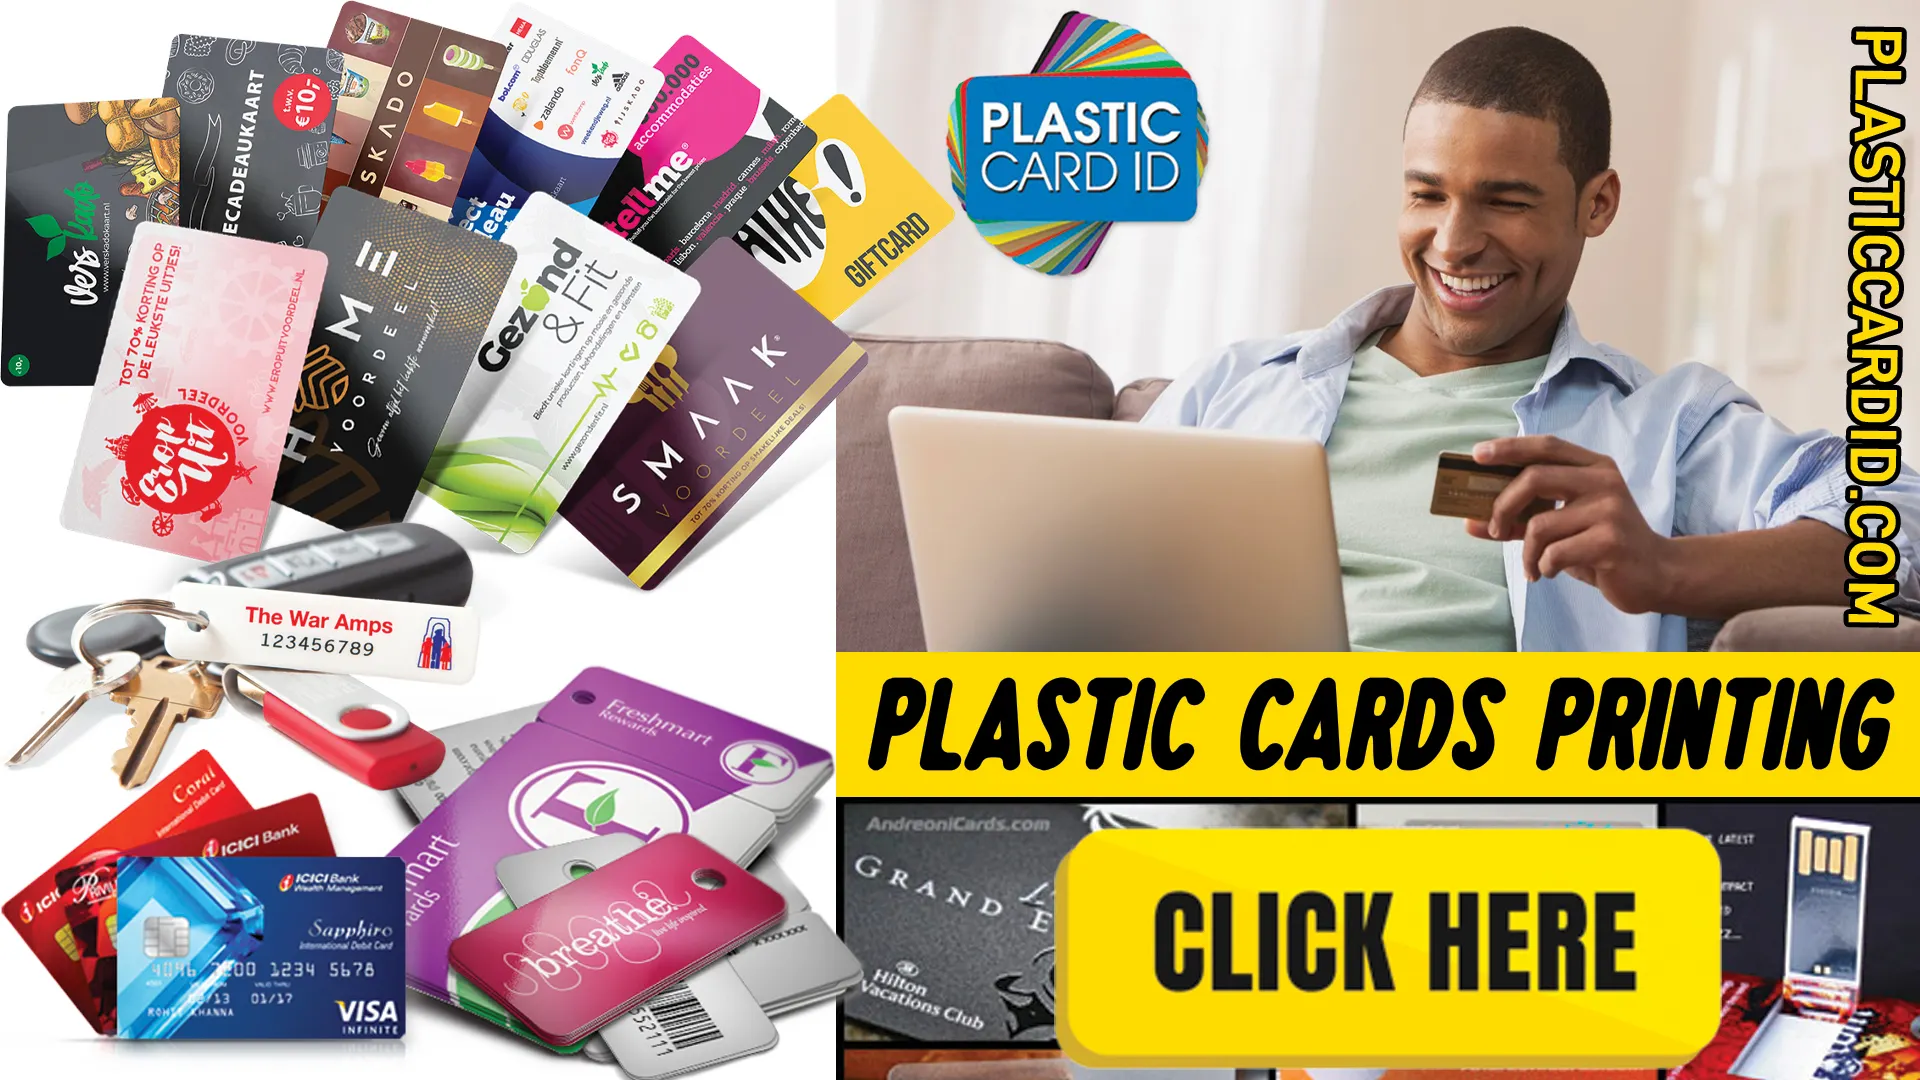 Welcome to the World of Secure and Trustworthy Plastic Cards